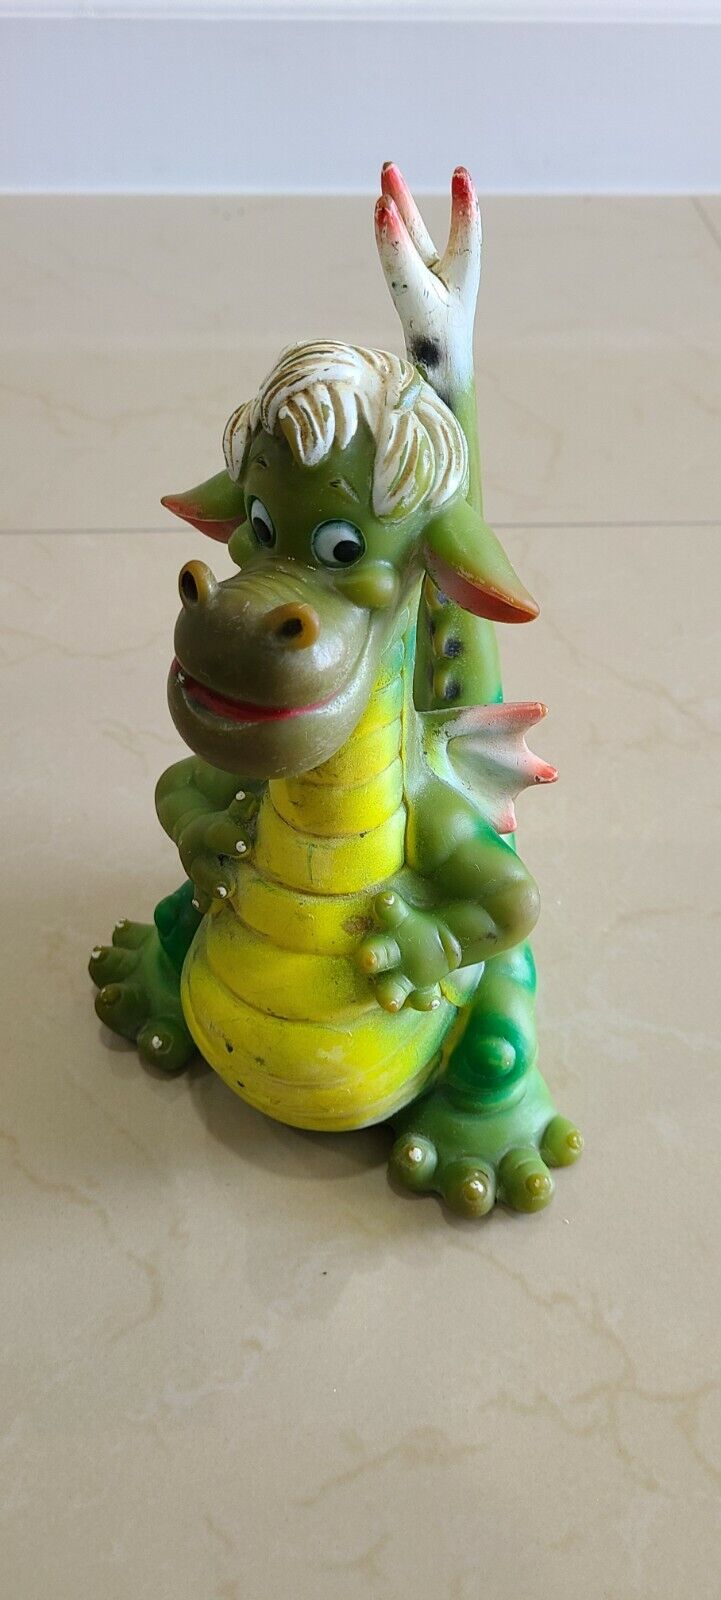 VINTAGE PETE'S DRAGON ELLIOT RUBBER TOY Disney 1977 Made in Italy